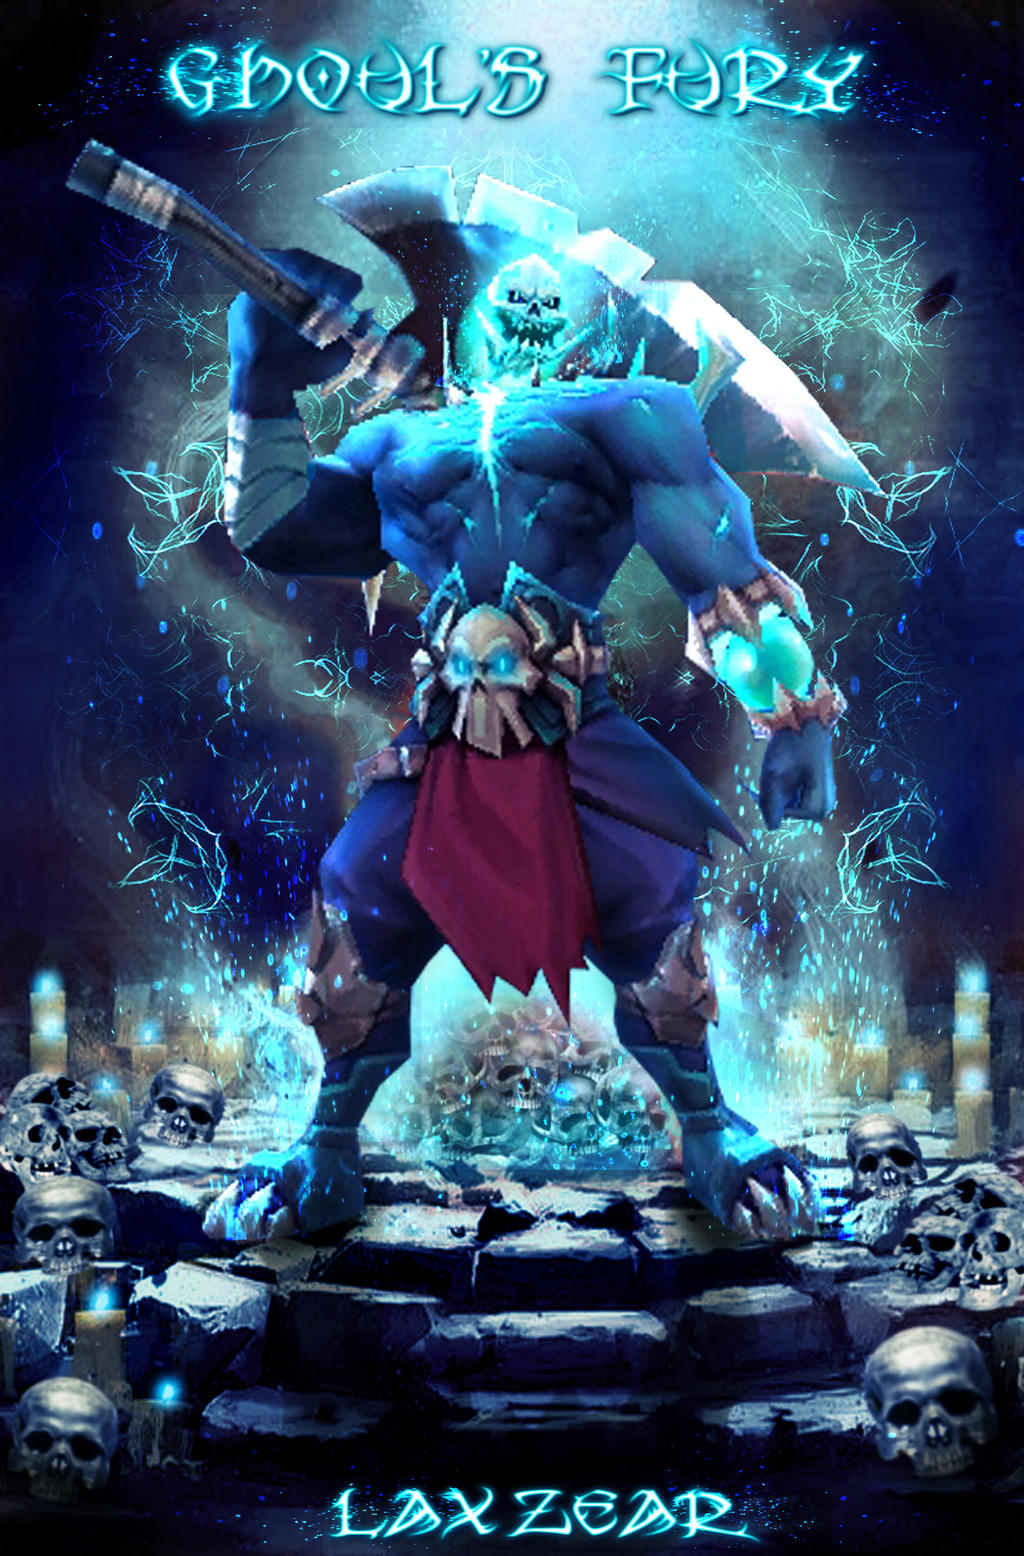  Balmond  Ghoul s Fury Skin Of Mobile  Legends  by Laxzear on 